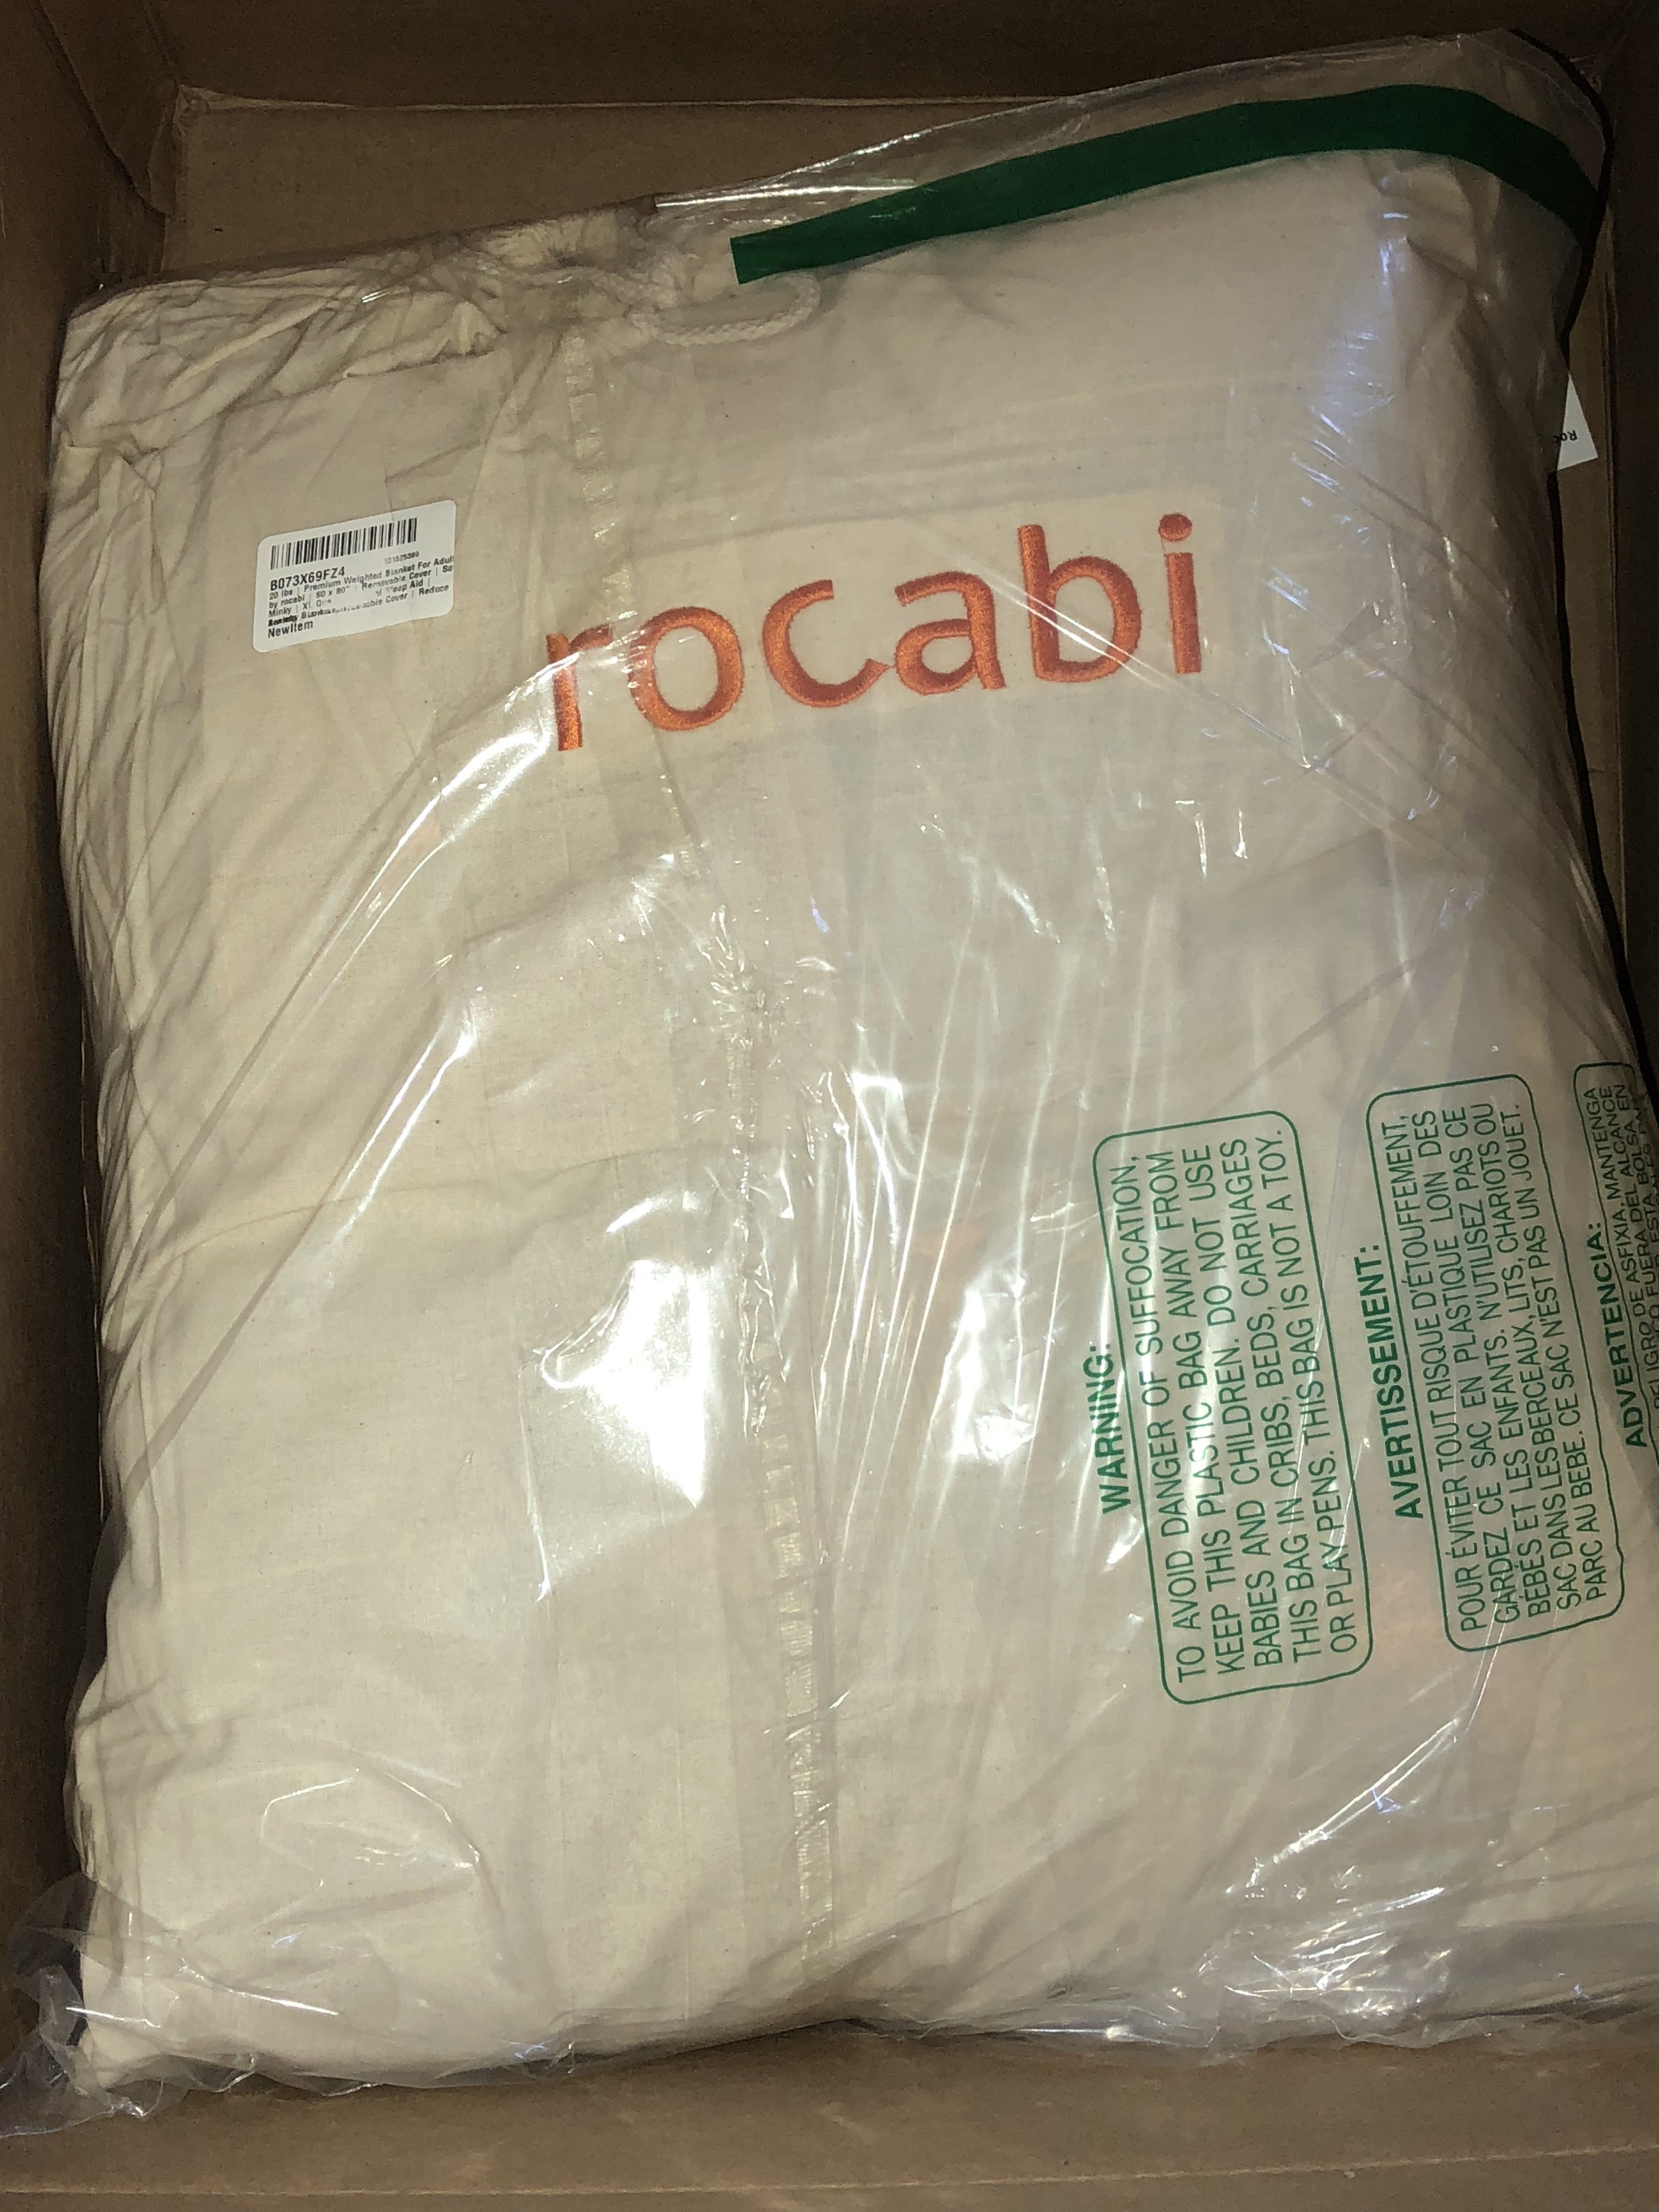 Rocabi Weighted Blanket Designed to Reduce Anxiety & Induce a Sense of